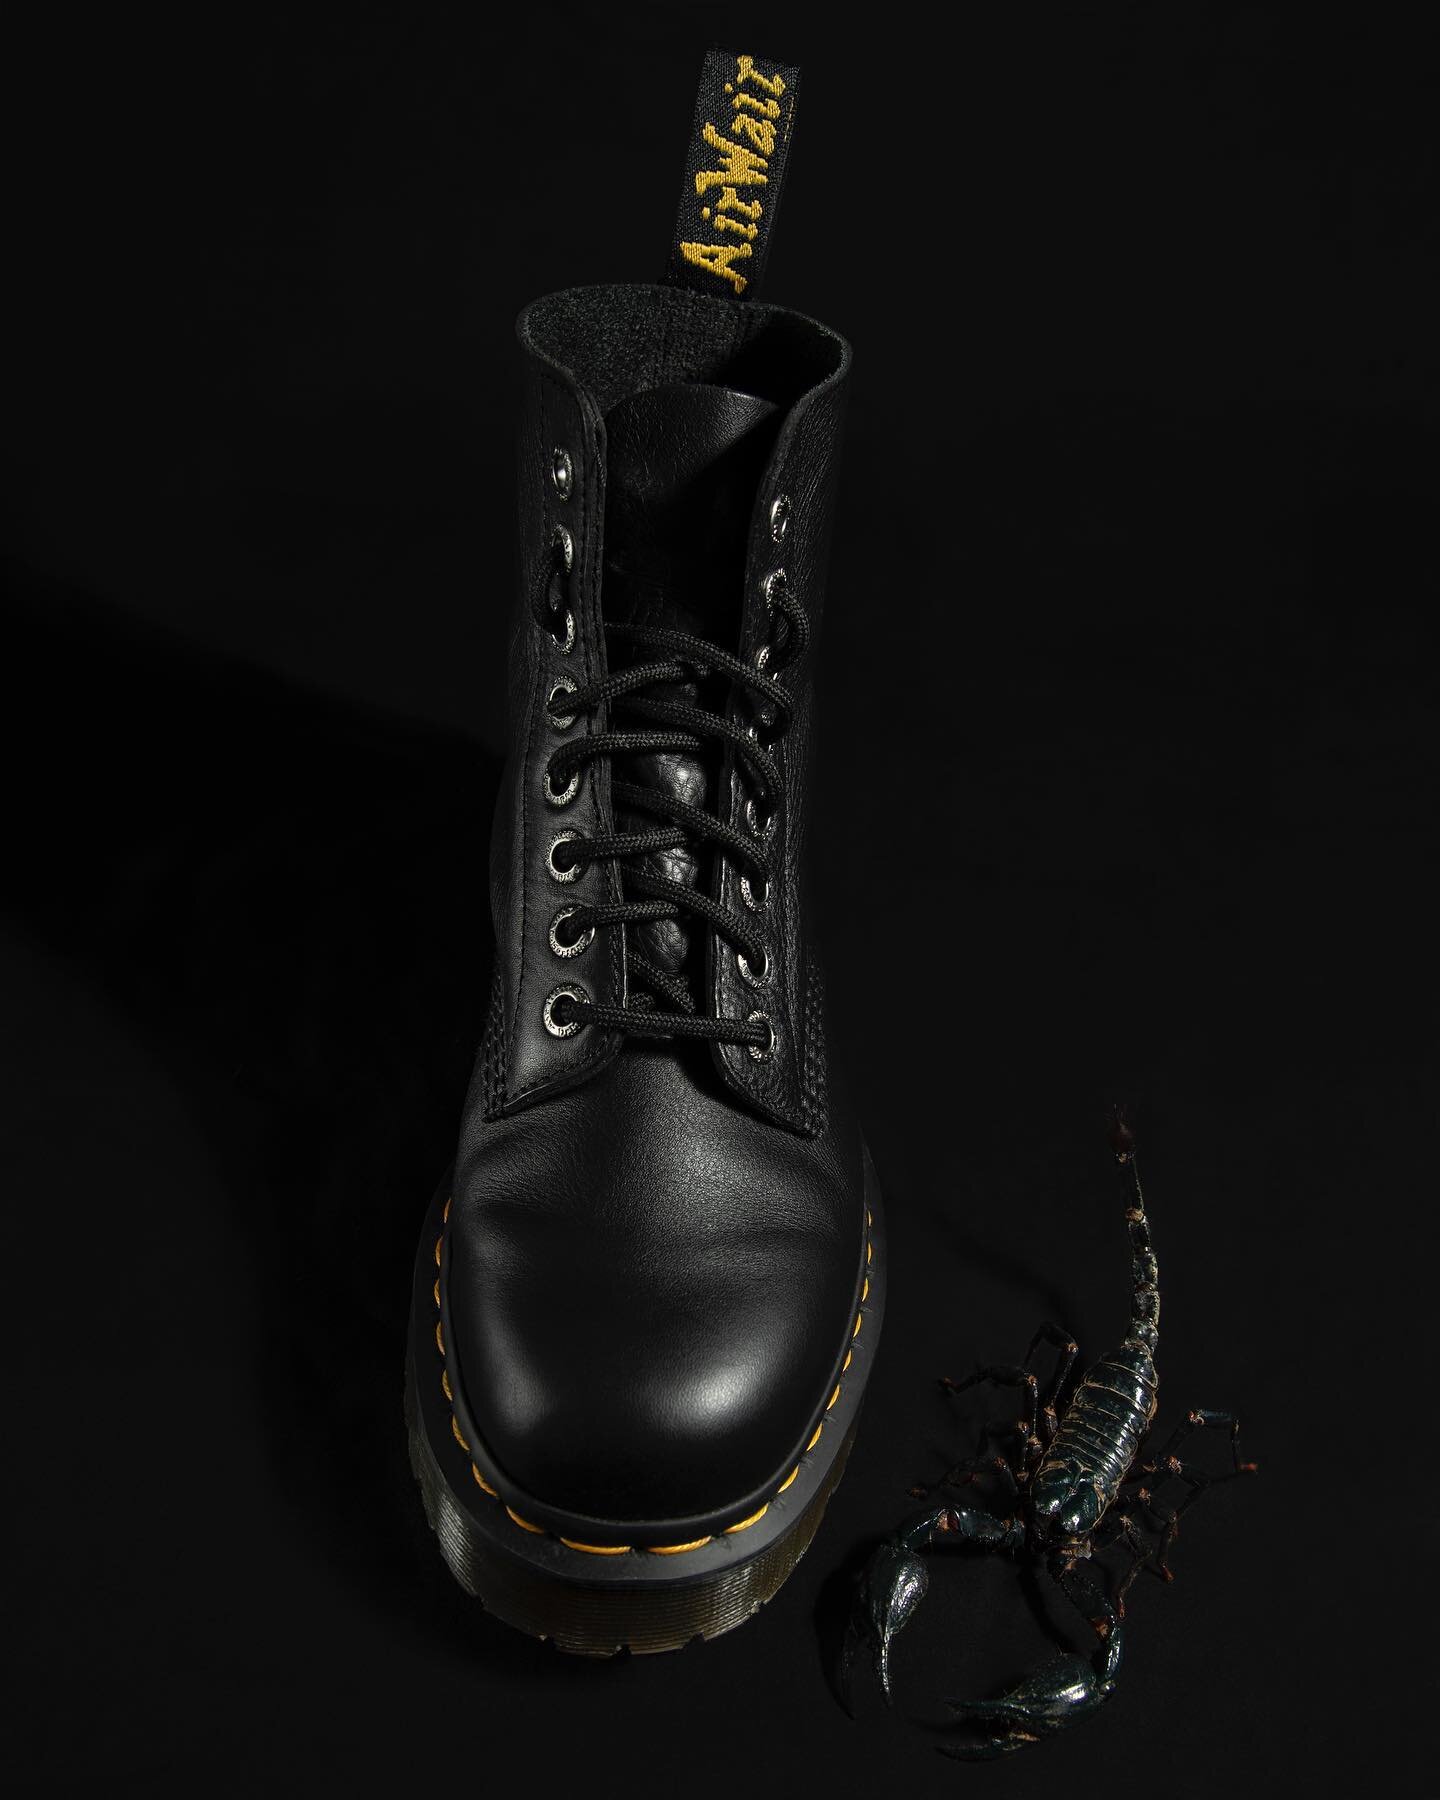 @drmartensofficial 
Scorpion from @thebutterflycompany